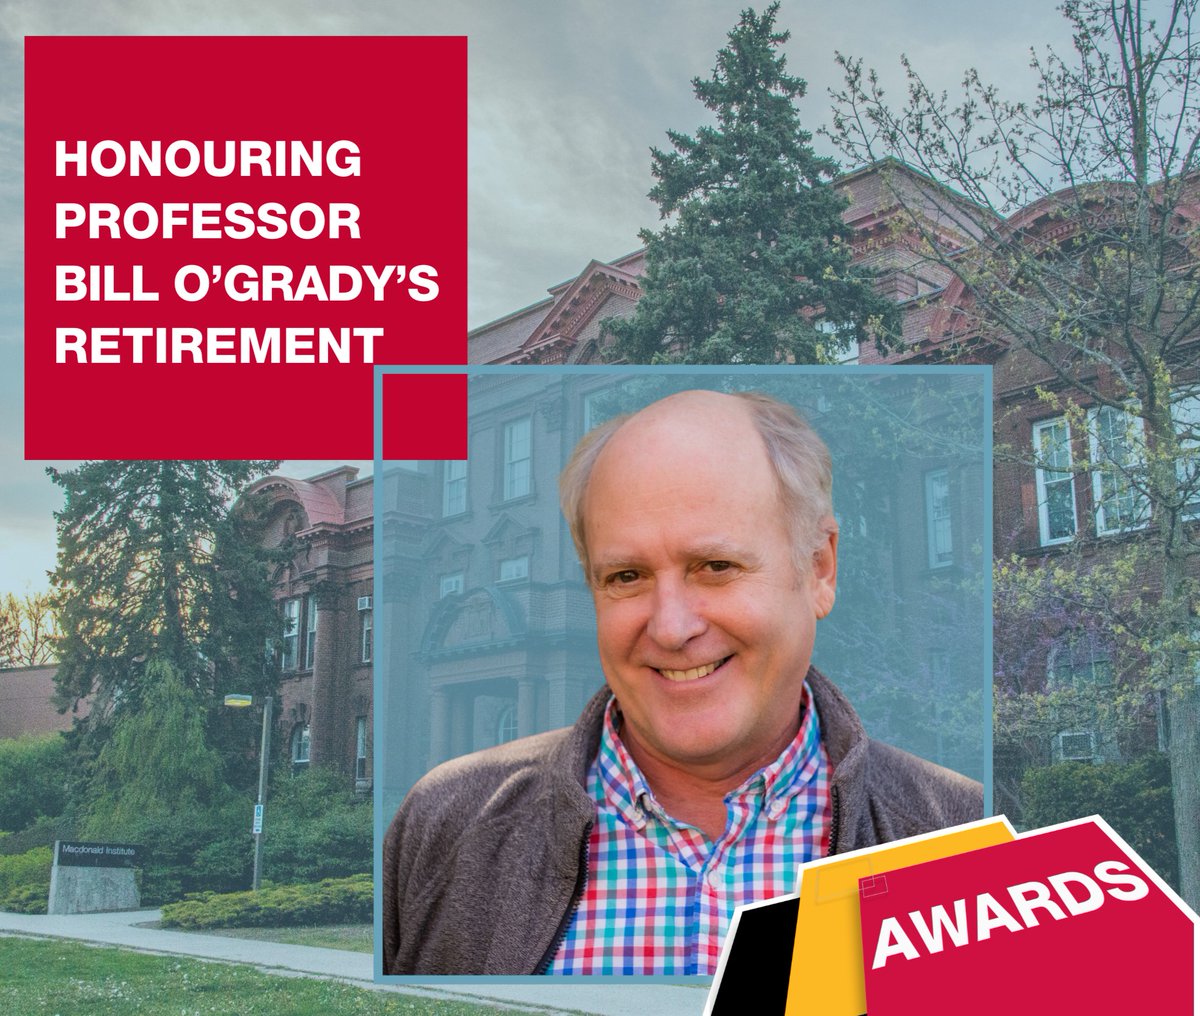 Join us in celebrating Dr. William (Bill) O'Grady's legacy! We're thrilled to announce the creation of the Dr. William O'Grady Prize for Excellence in CJPP at @uofg. Help us honor his contributions to Criminal Justice and Public Policy programs by donating today! #UofGAwards